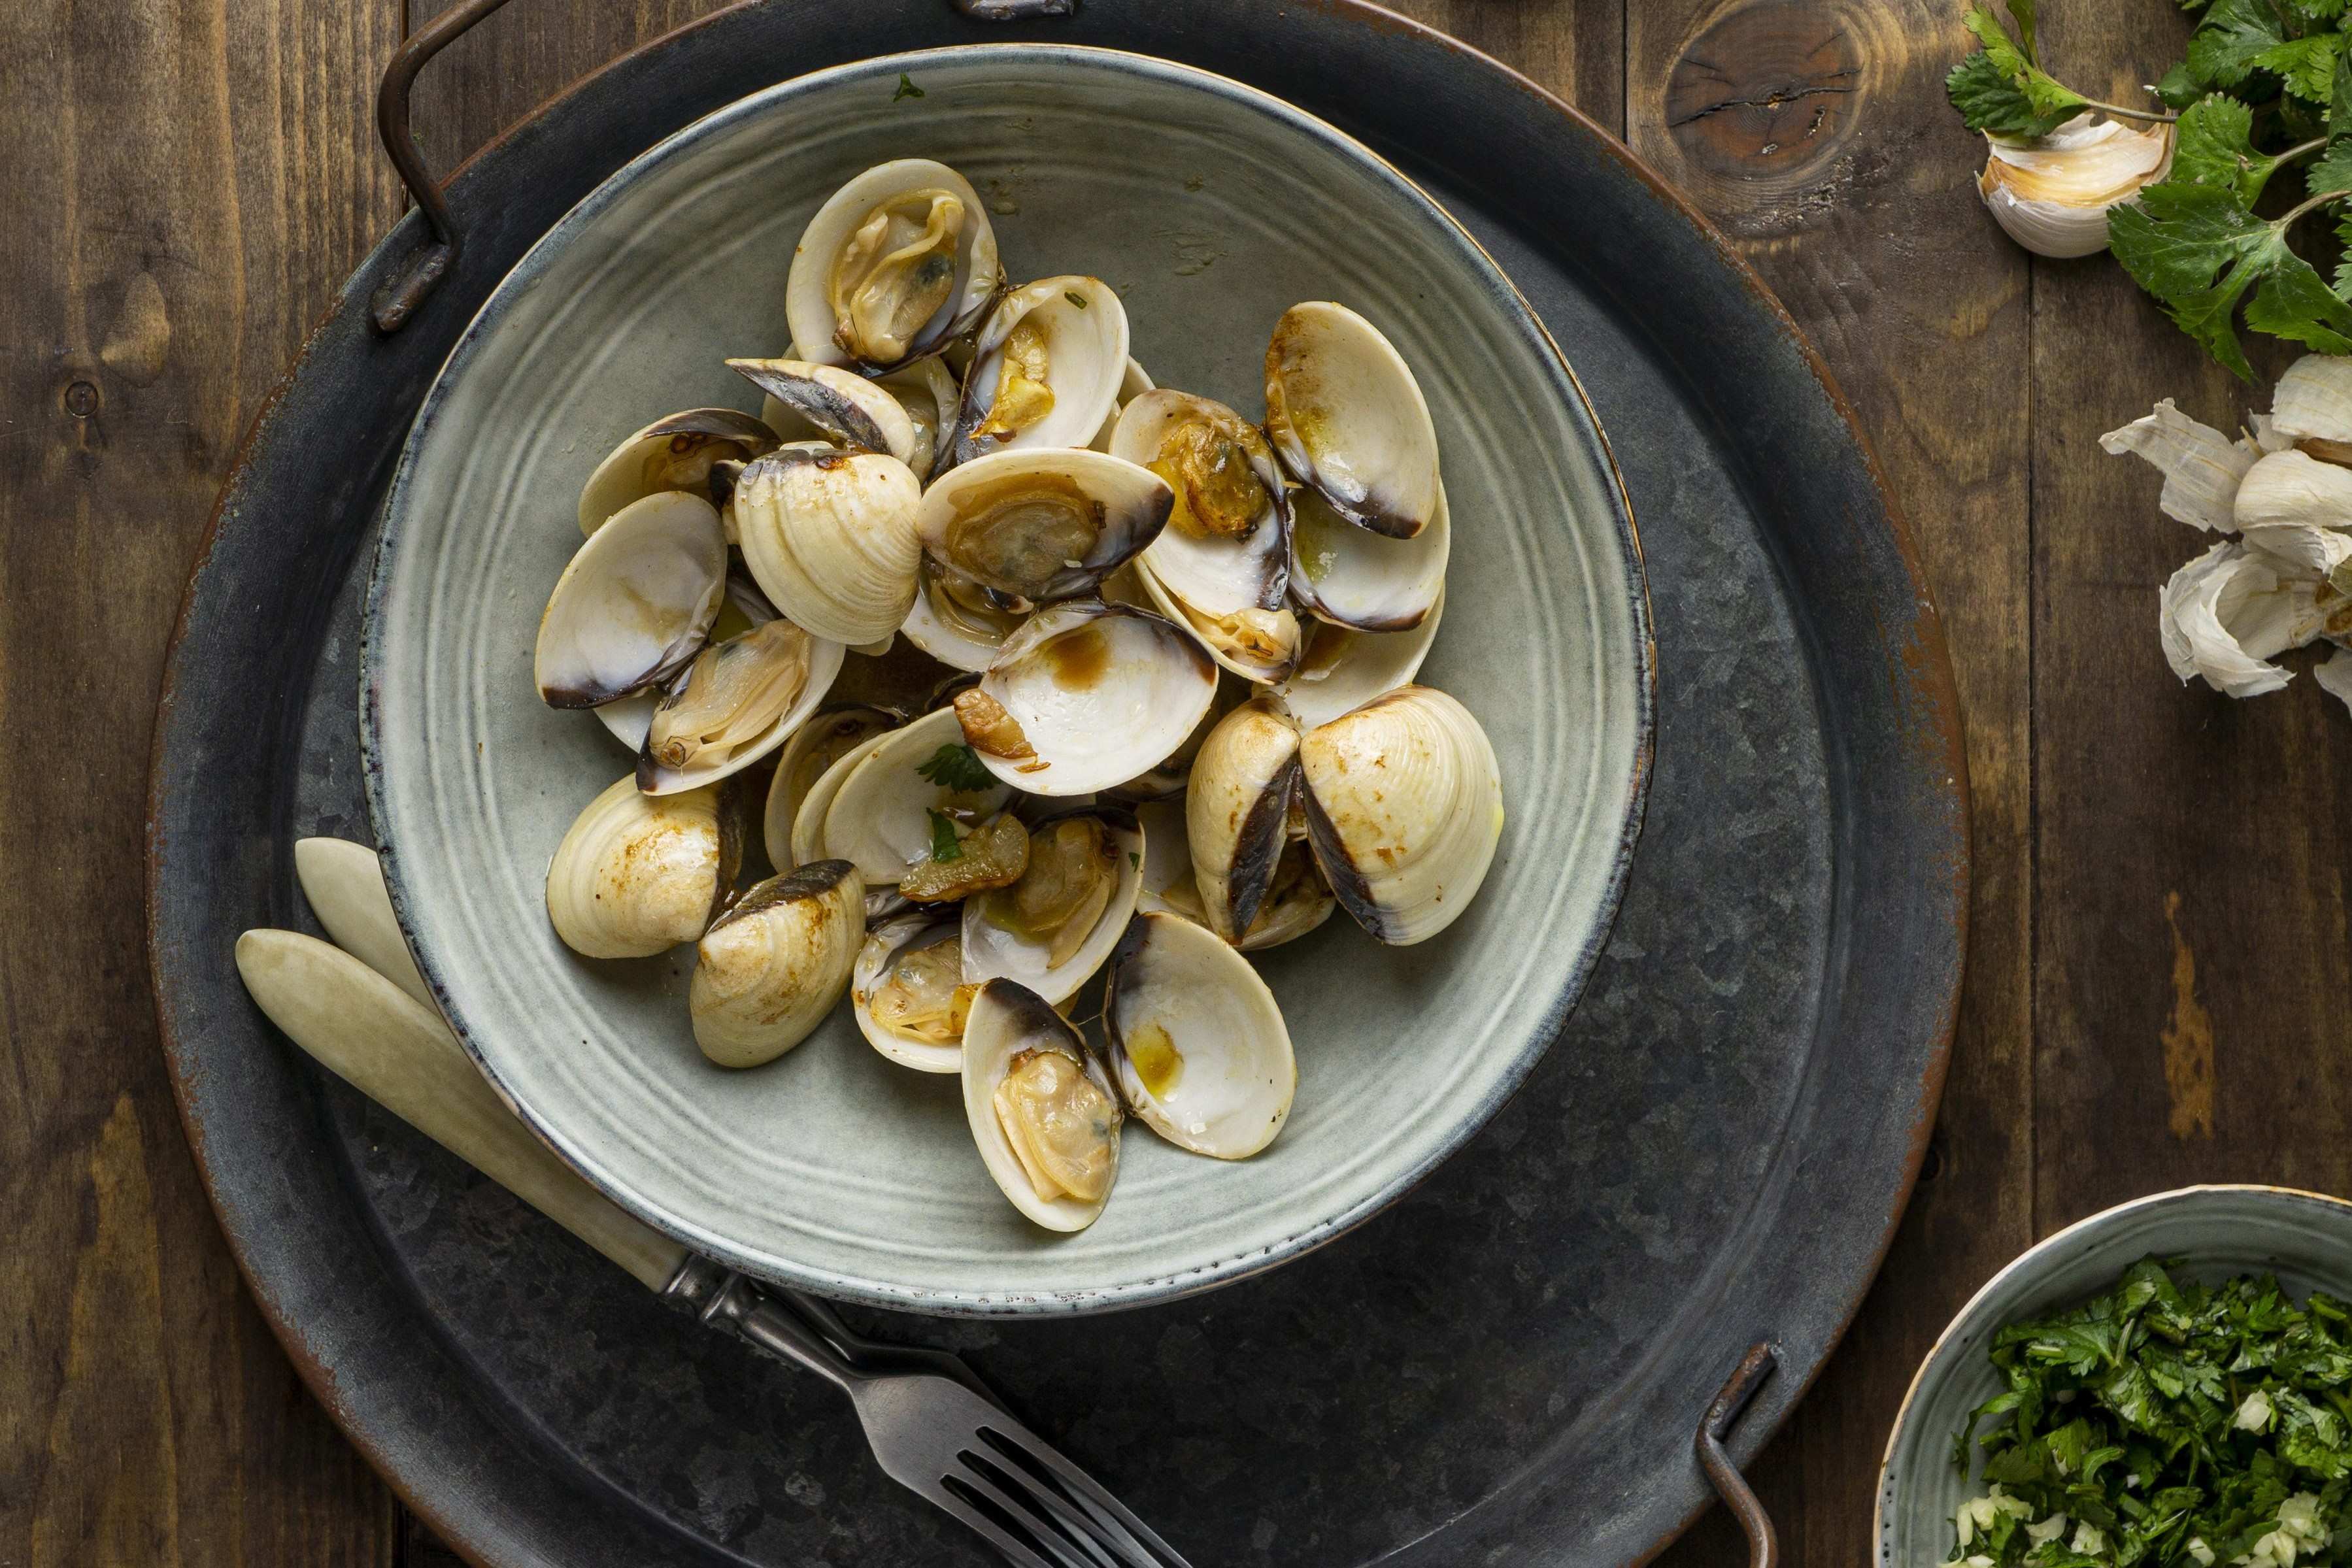 The US imported over 5,000 tons of clams in the first quarter of 2023